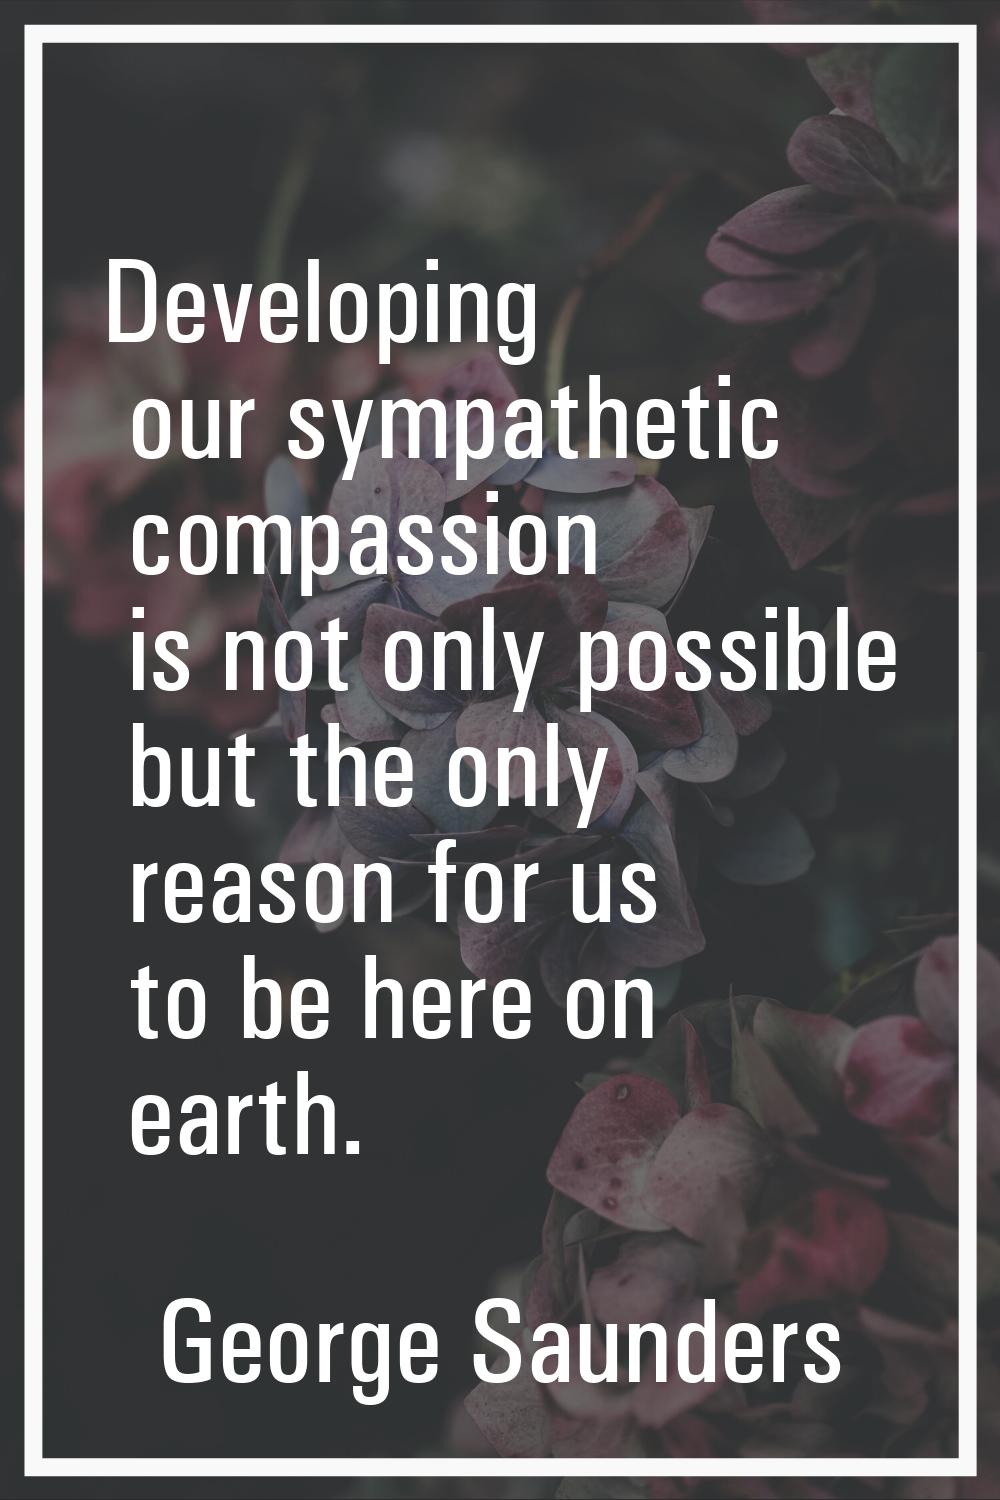 Developing our sympathetic compassion is not only possible but the only reason for us to be here on